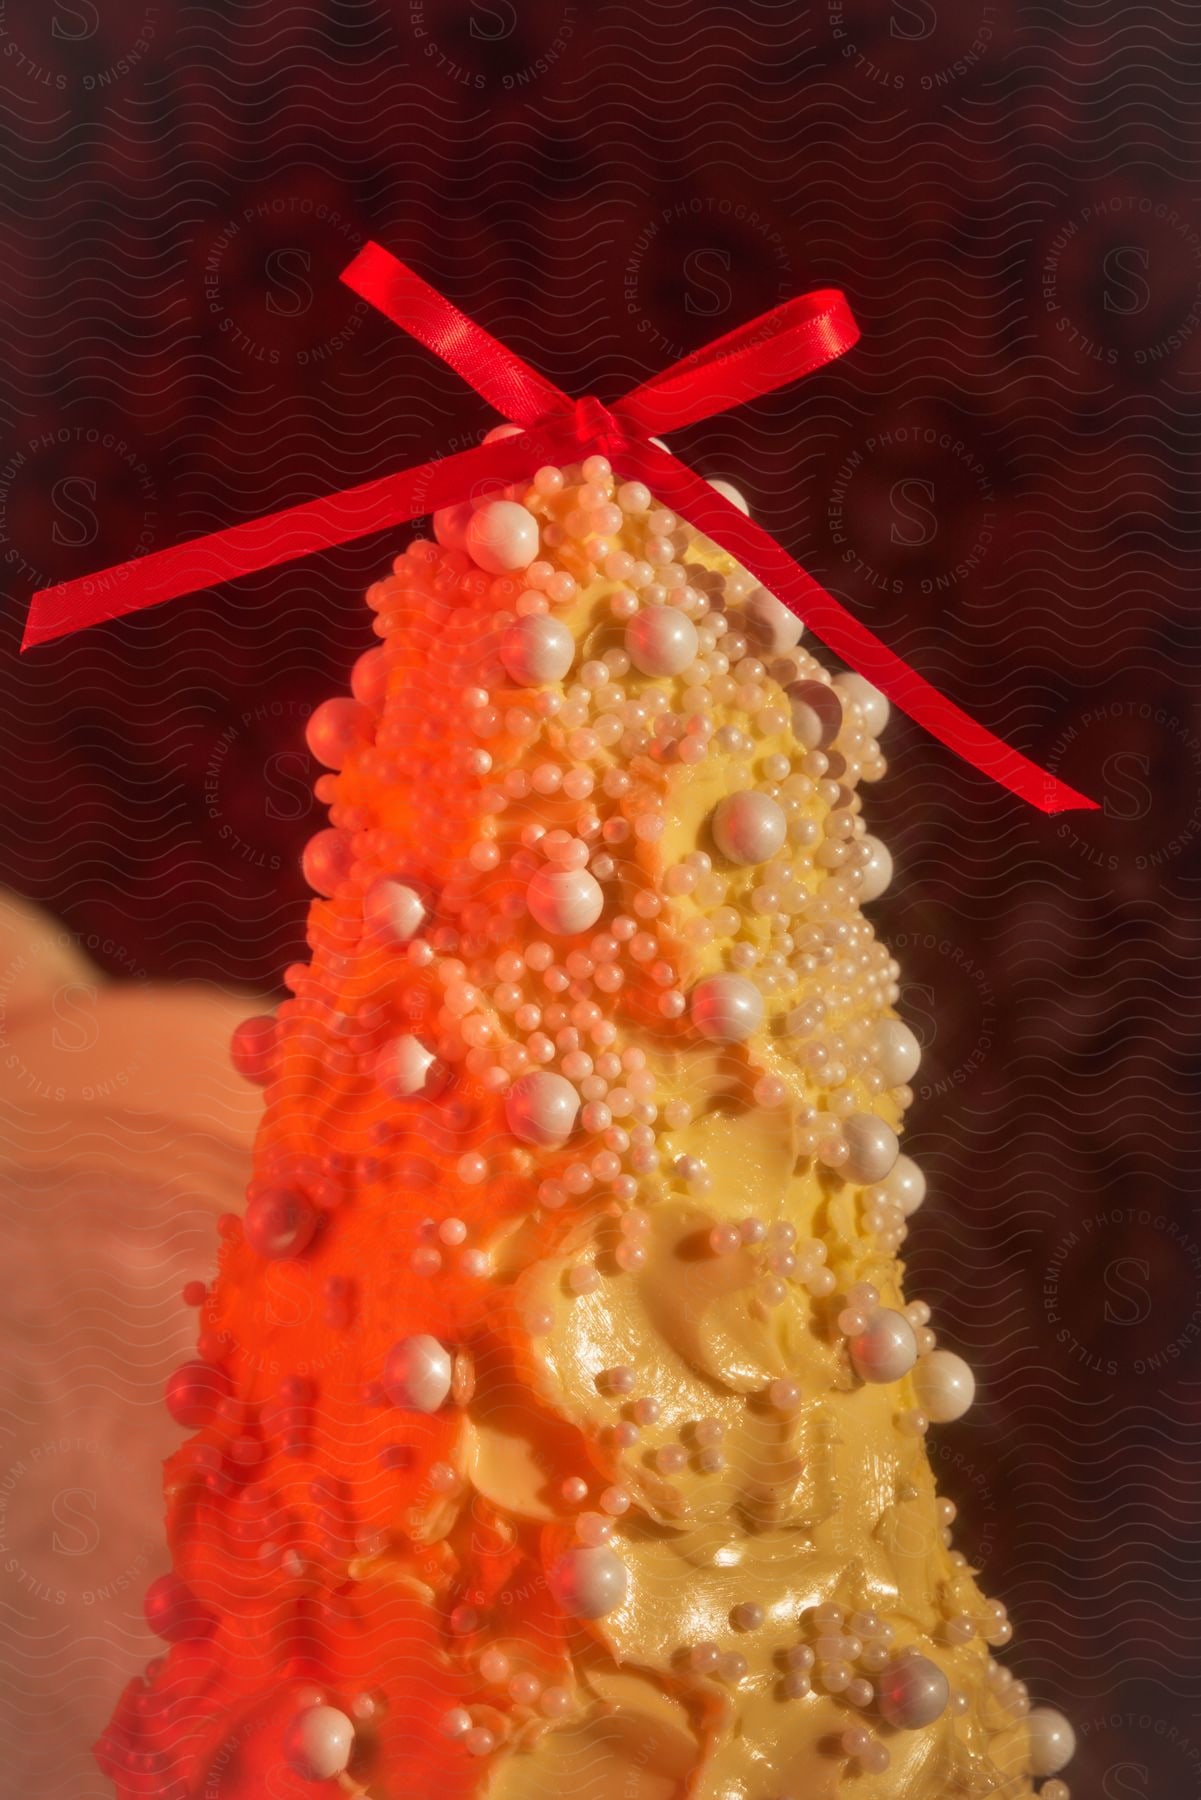 Vertical pastry with a red bow, orange frosting and candy pearls